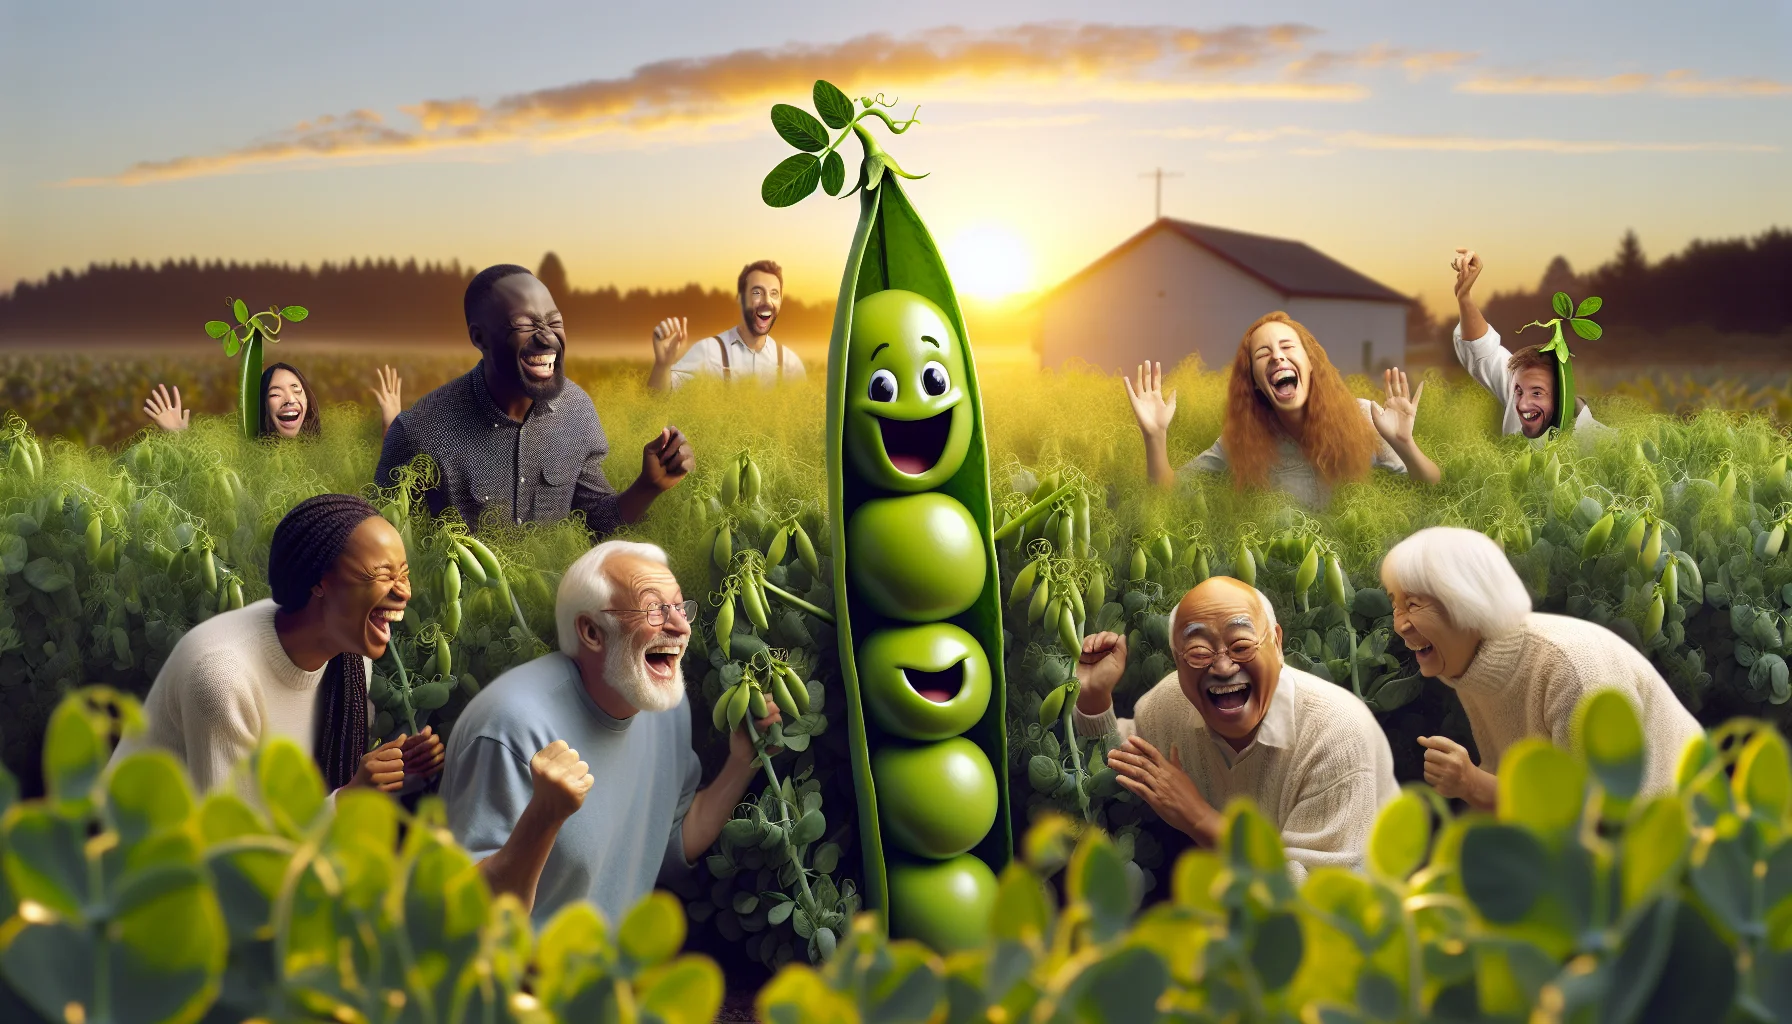 Create an amusing and realistic scene that motivates people to enjoy gardening. The garden is abundant with English peas that have grown into giant legumes. They are playfully engaged in a tag game, with two peas as the players and the third, with a big smile on its face, acting as the referee. The garden is set against a morning sunrise with a warm golden hue touching the plants. Male and female gardening enthusiasts of diverse descents, Caucasian, Hispanic, Black, Middle-Eastern, South Asian, are watching and laughing at this charming spectacle, inspired to take part in the cultivation of their own gardens.